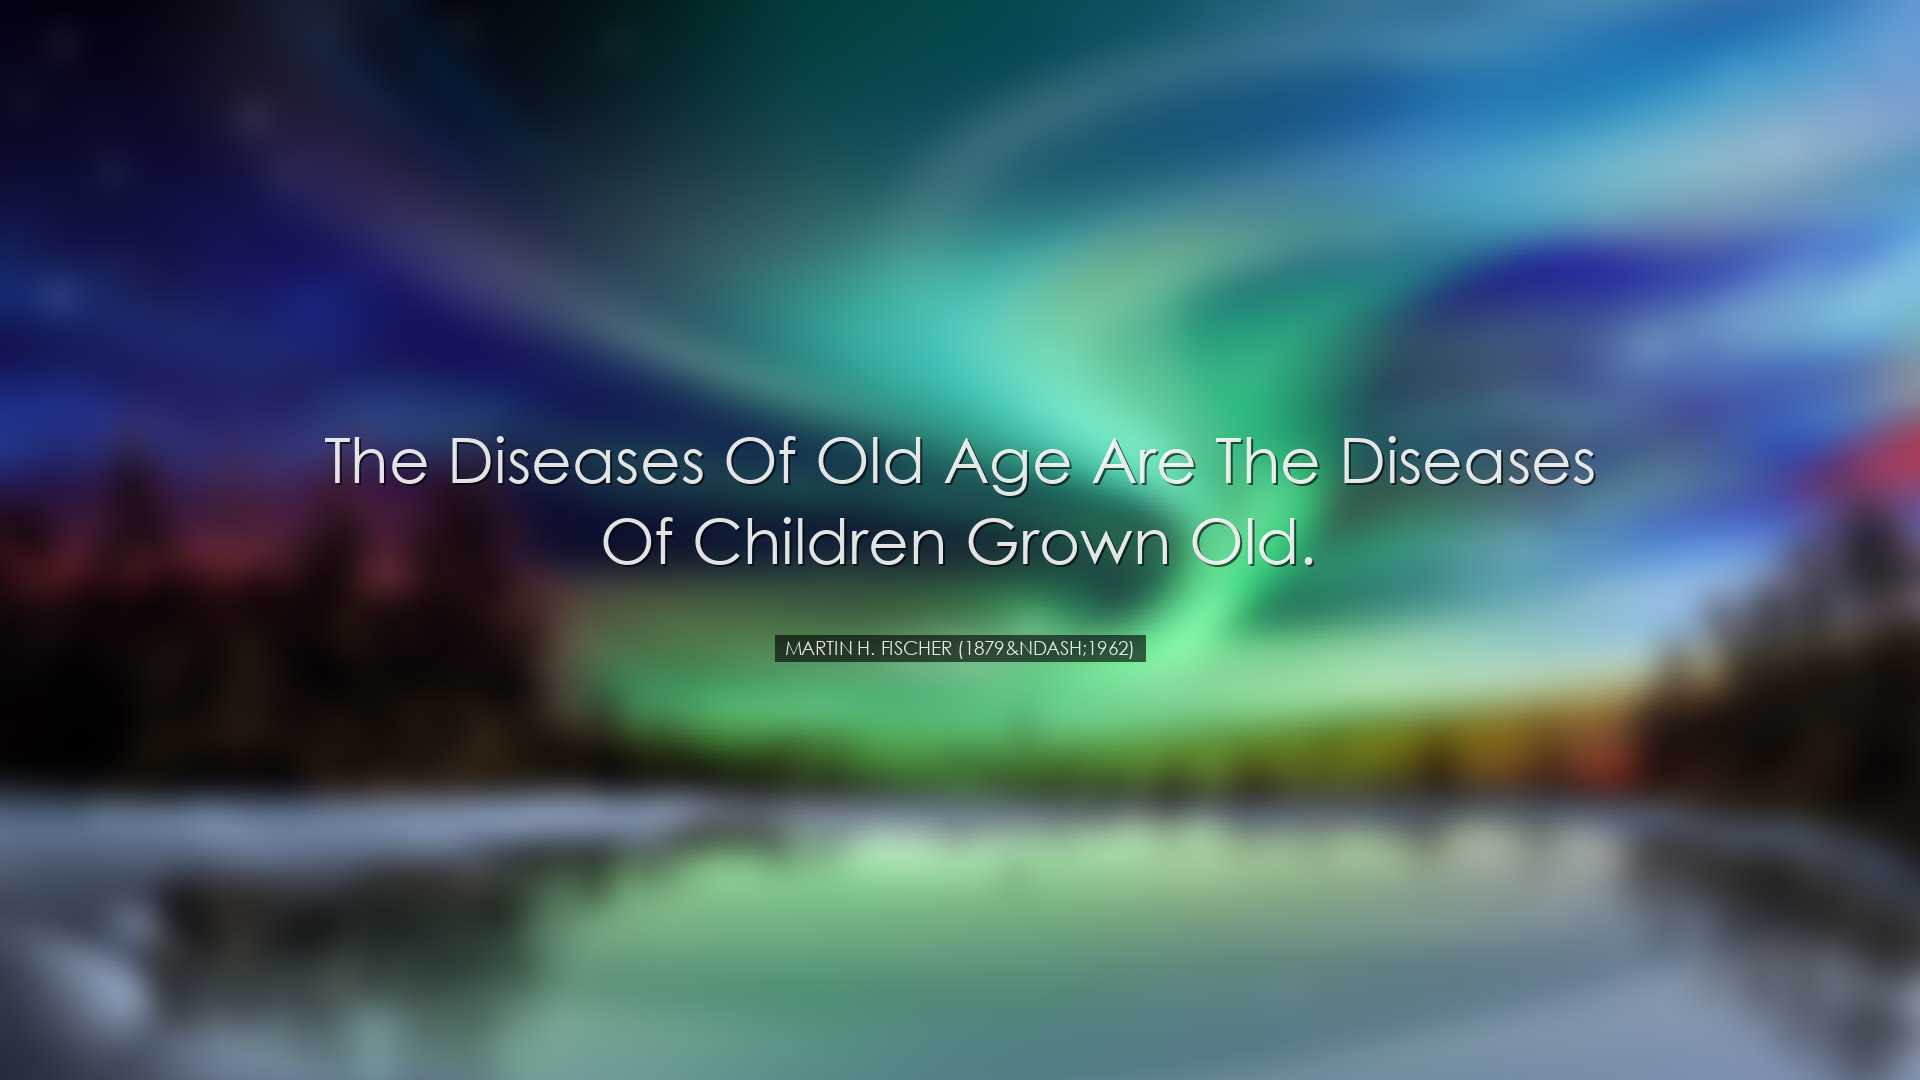 The diseases of old age are the diseases of children grown old. -